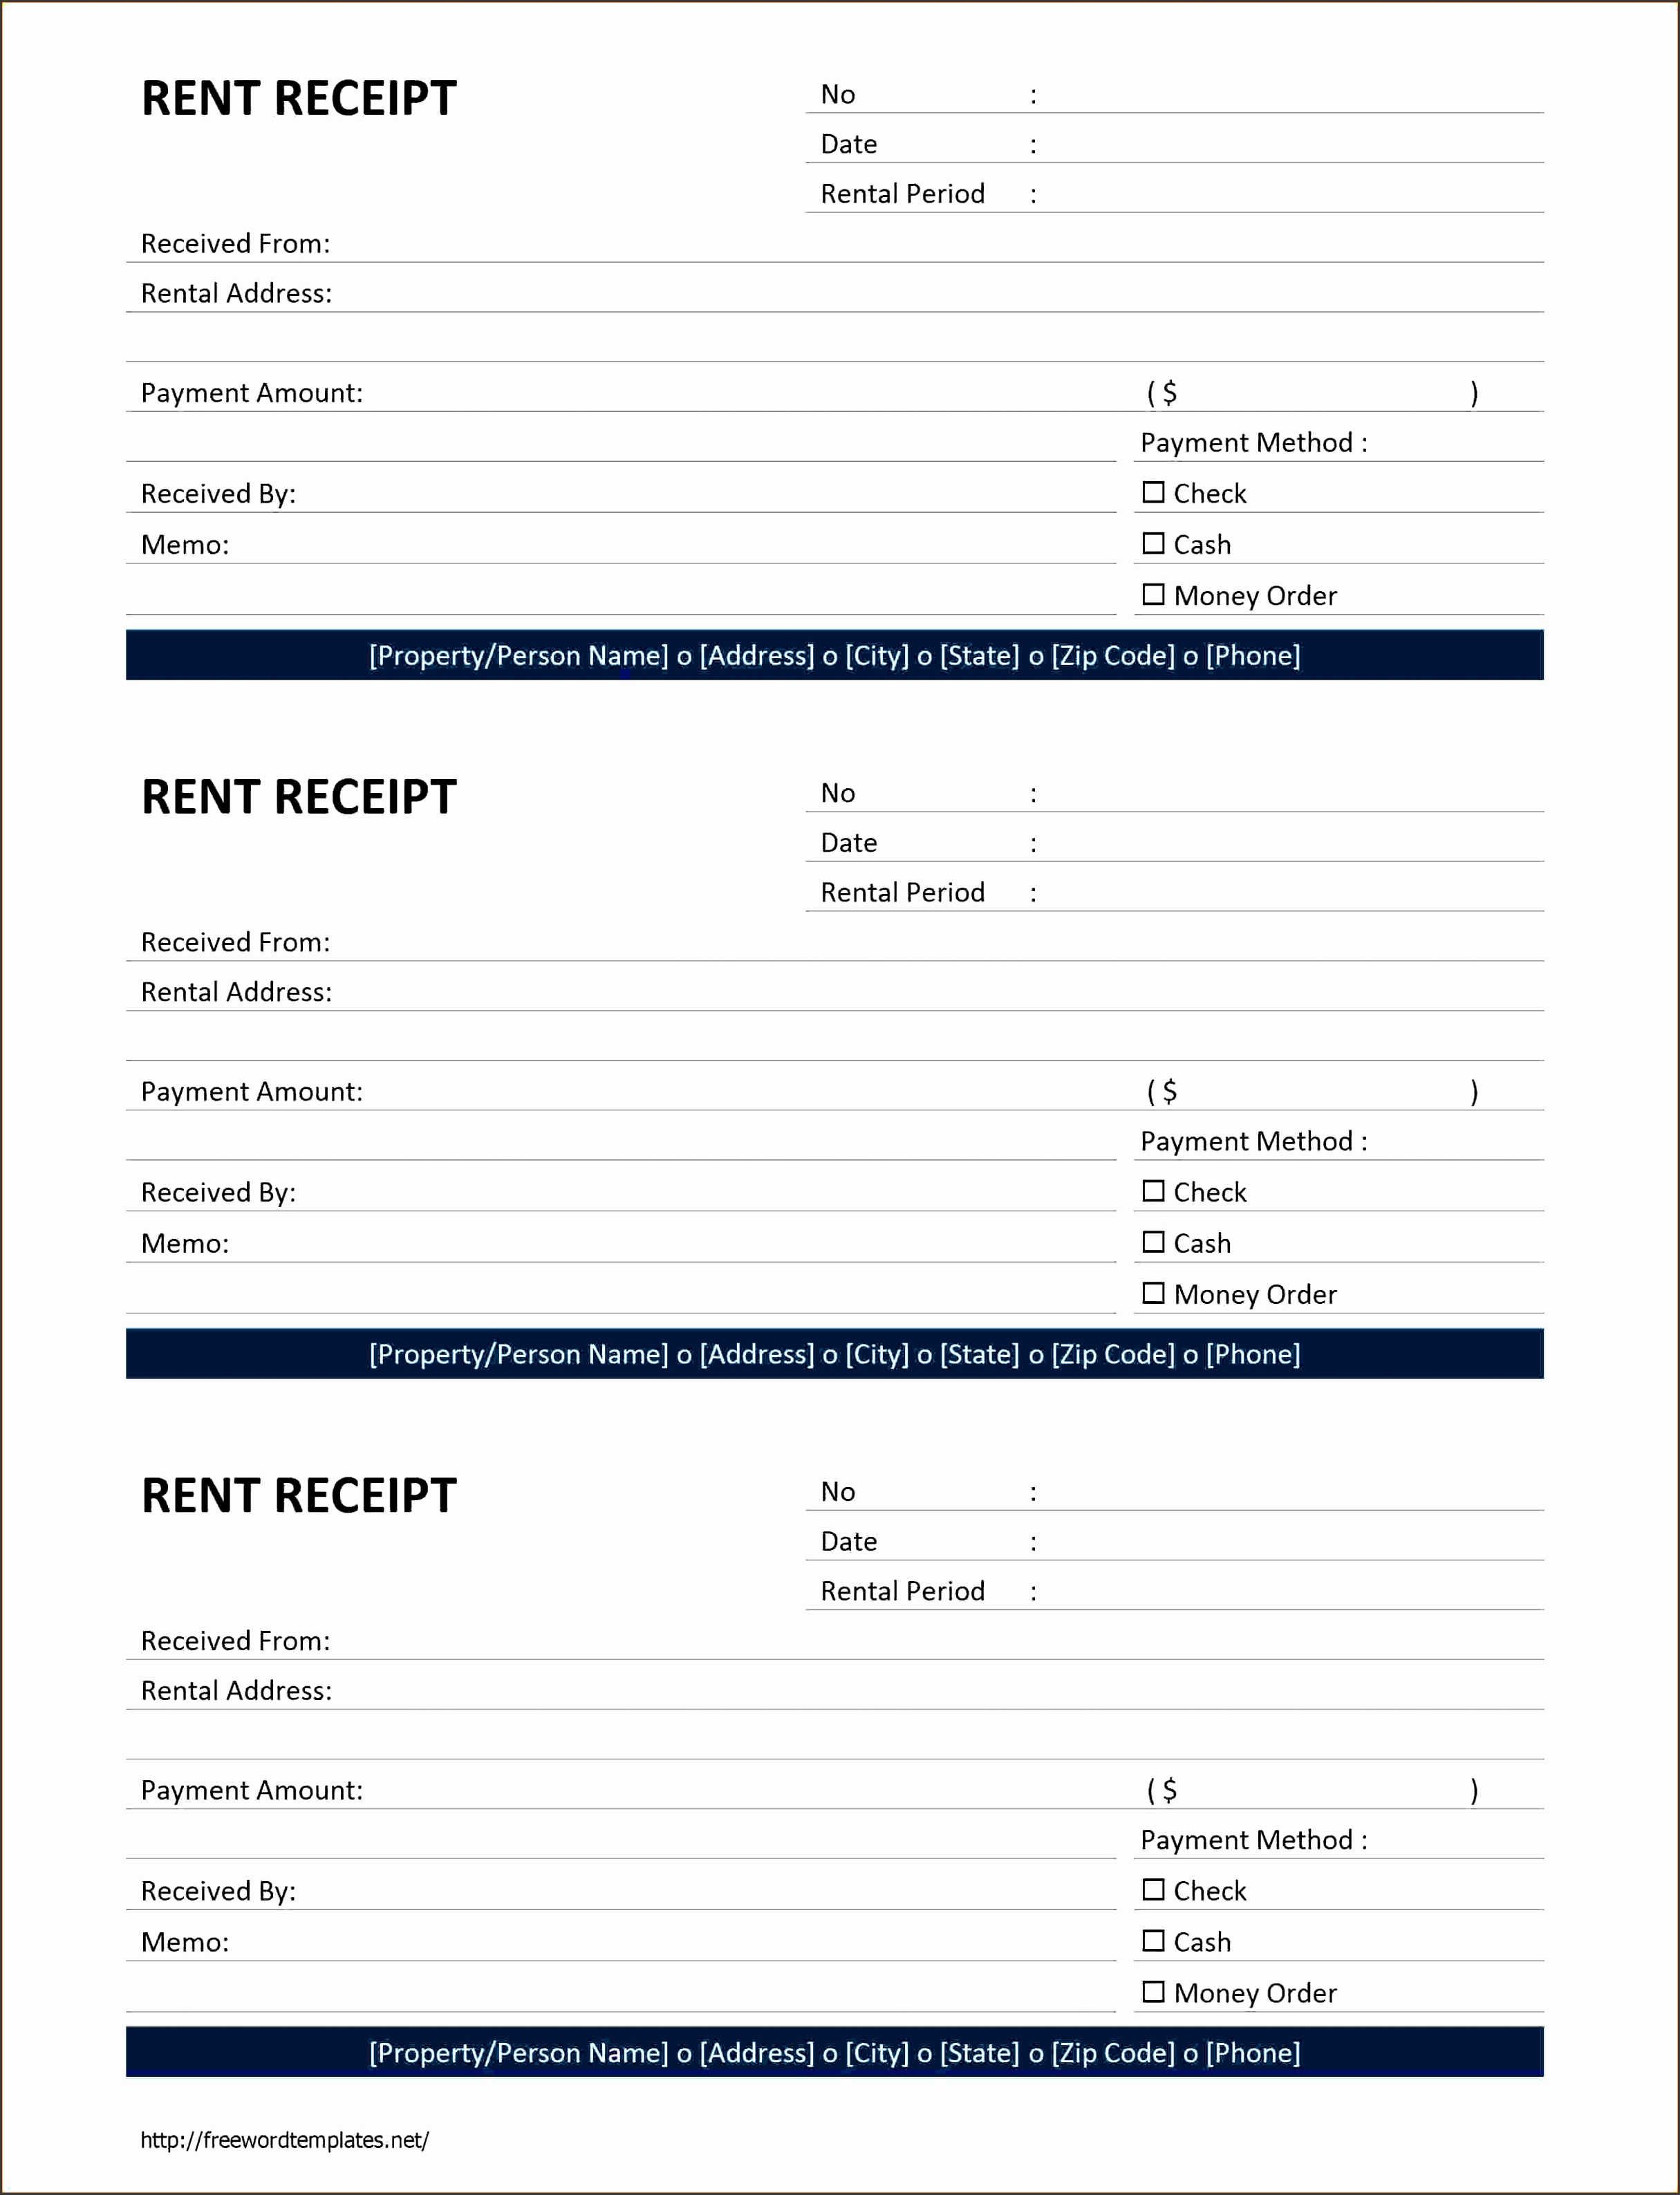 FREE Rent Receipt Template Word